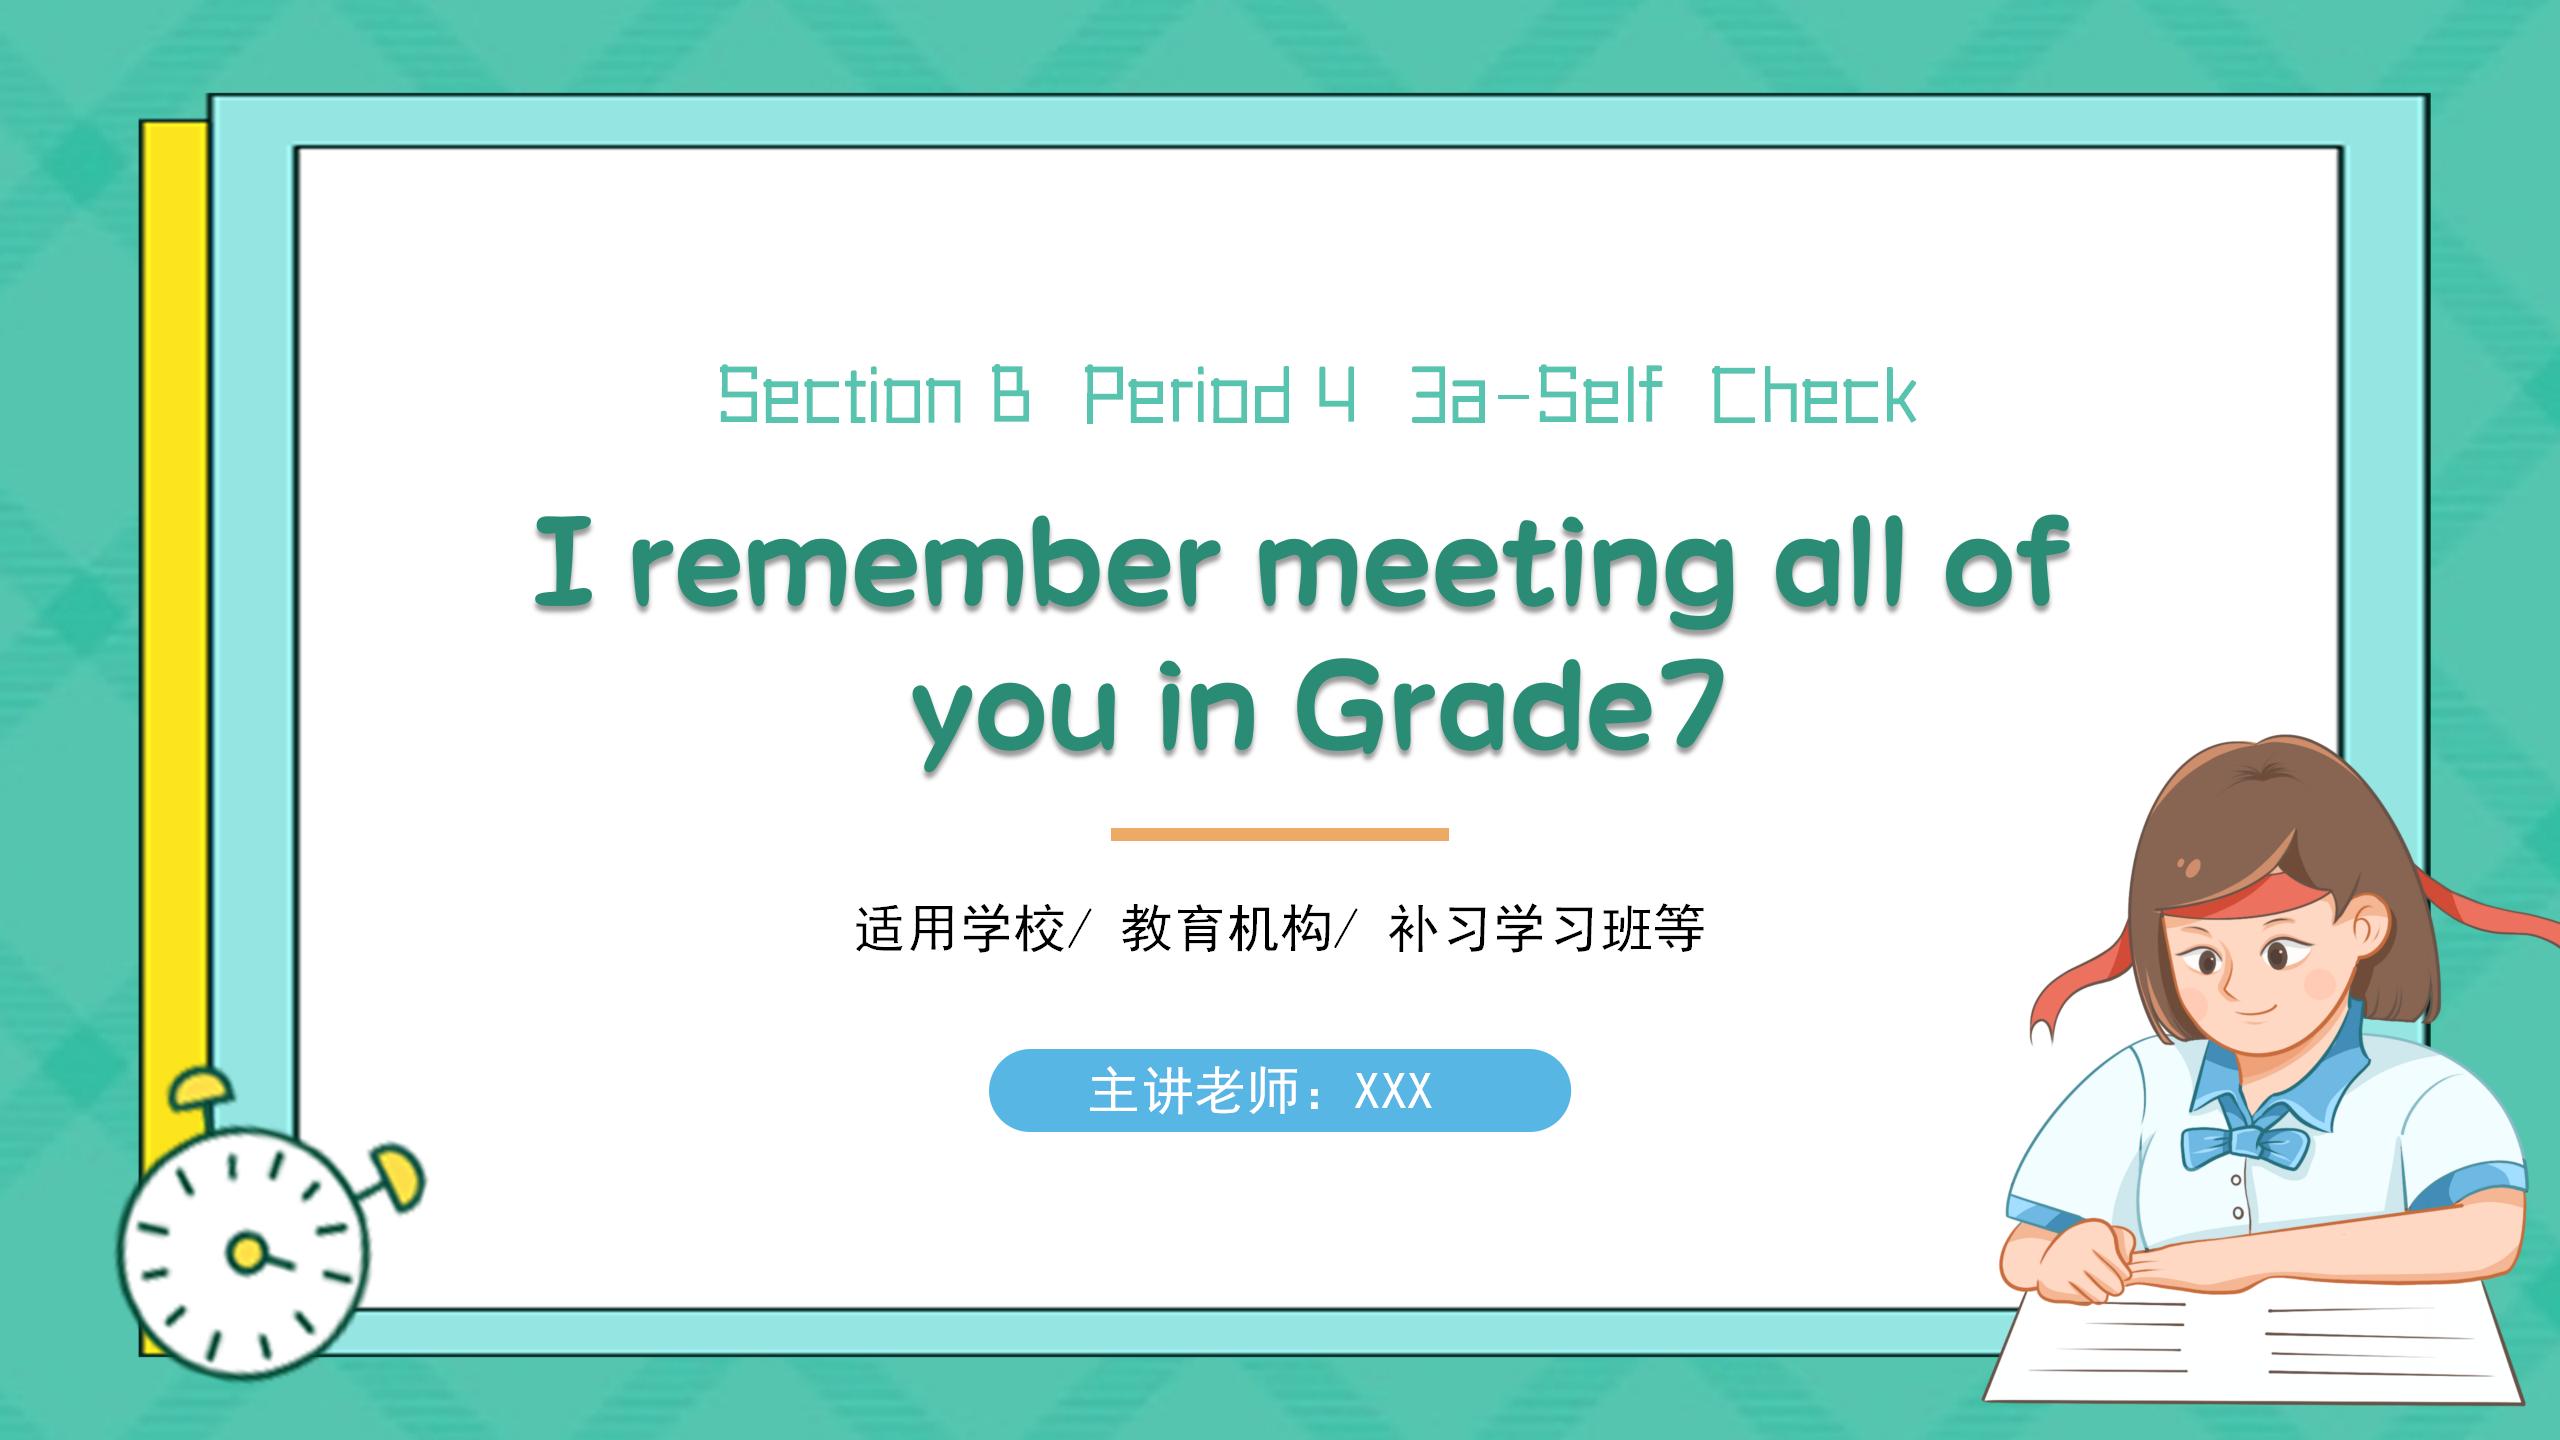 《I remember meeting all of you in Grade 7》PPT課件13